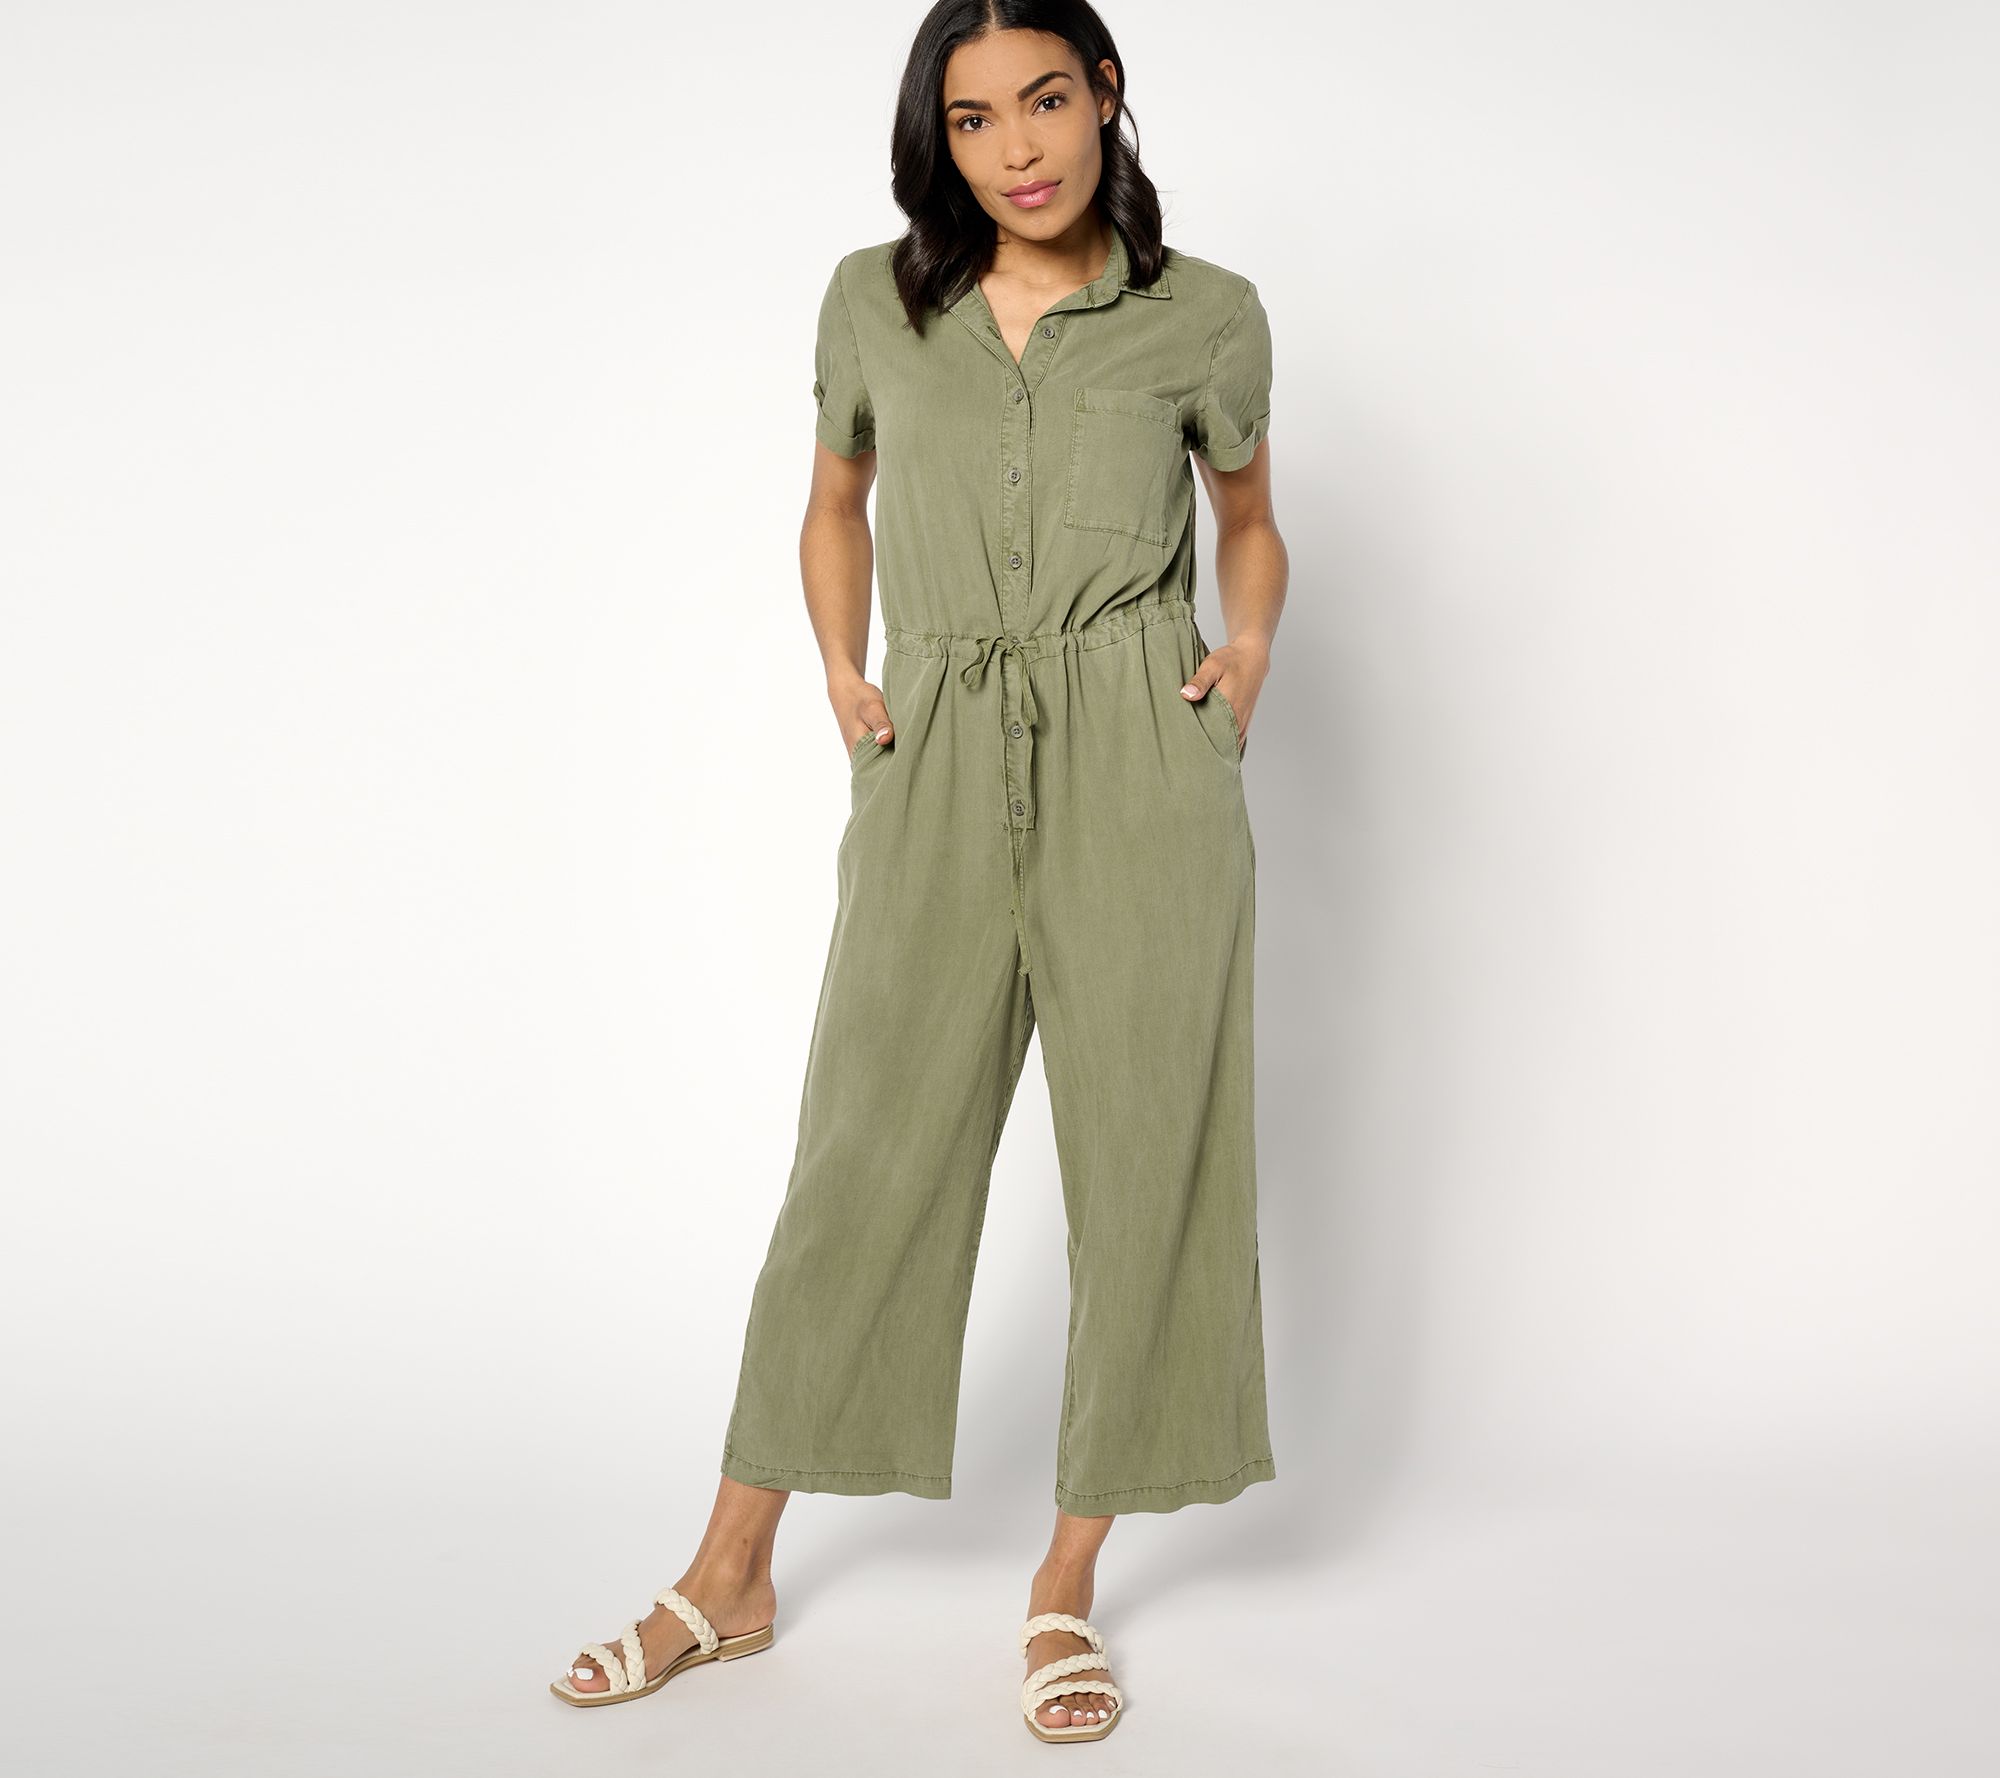 Women's Jumpsuits & Rompers  Formal & Casual Fit 